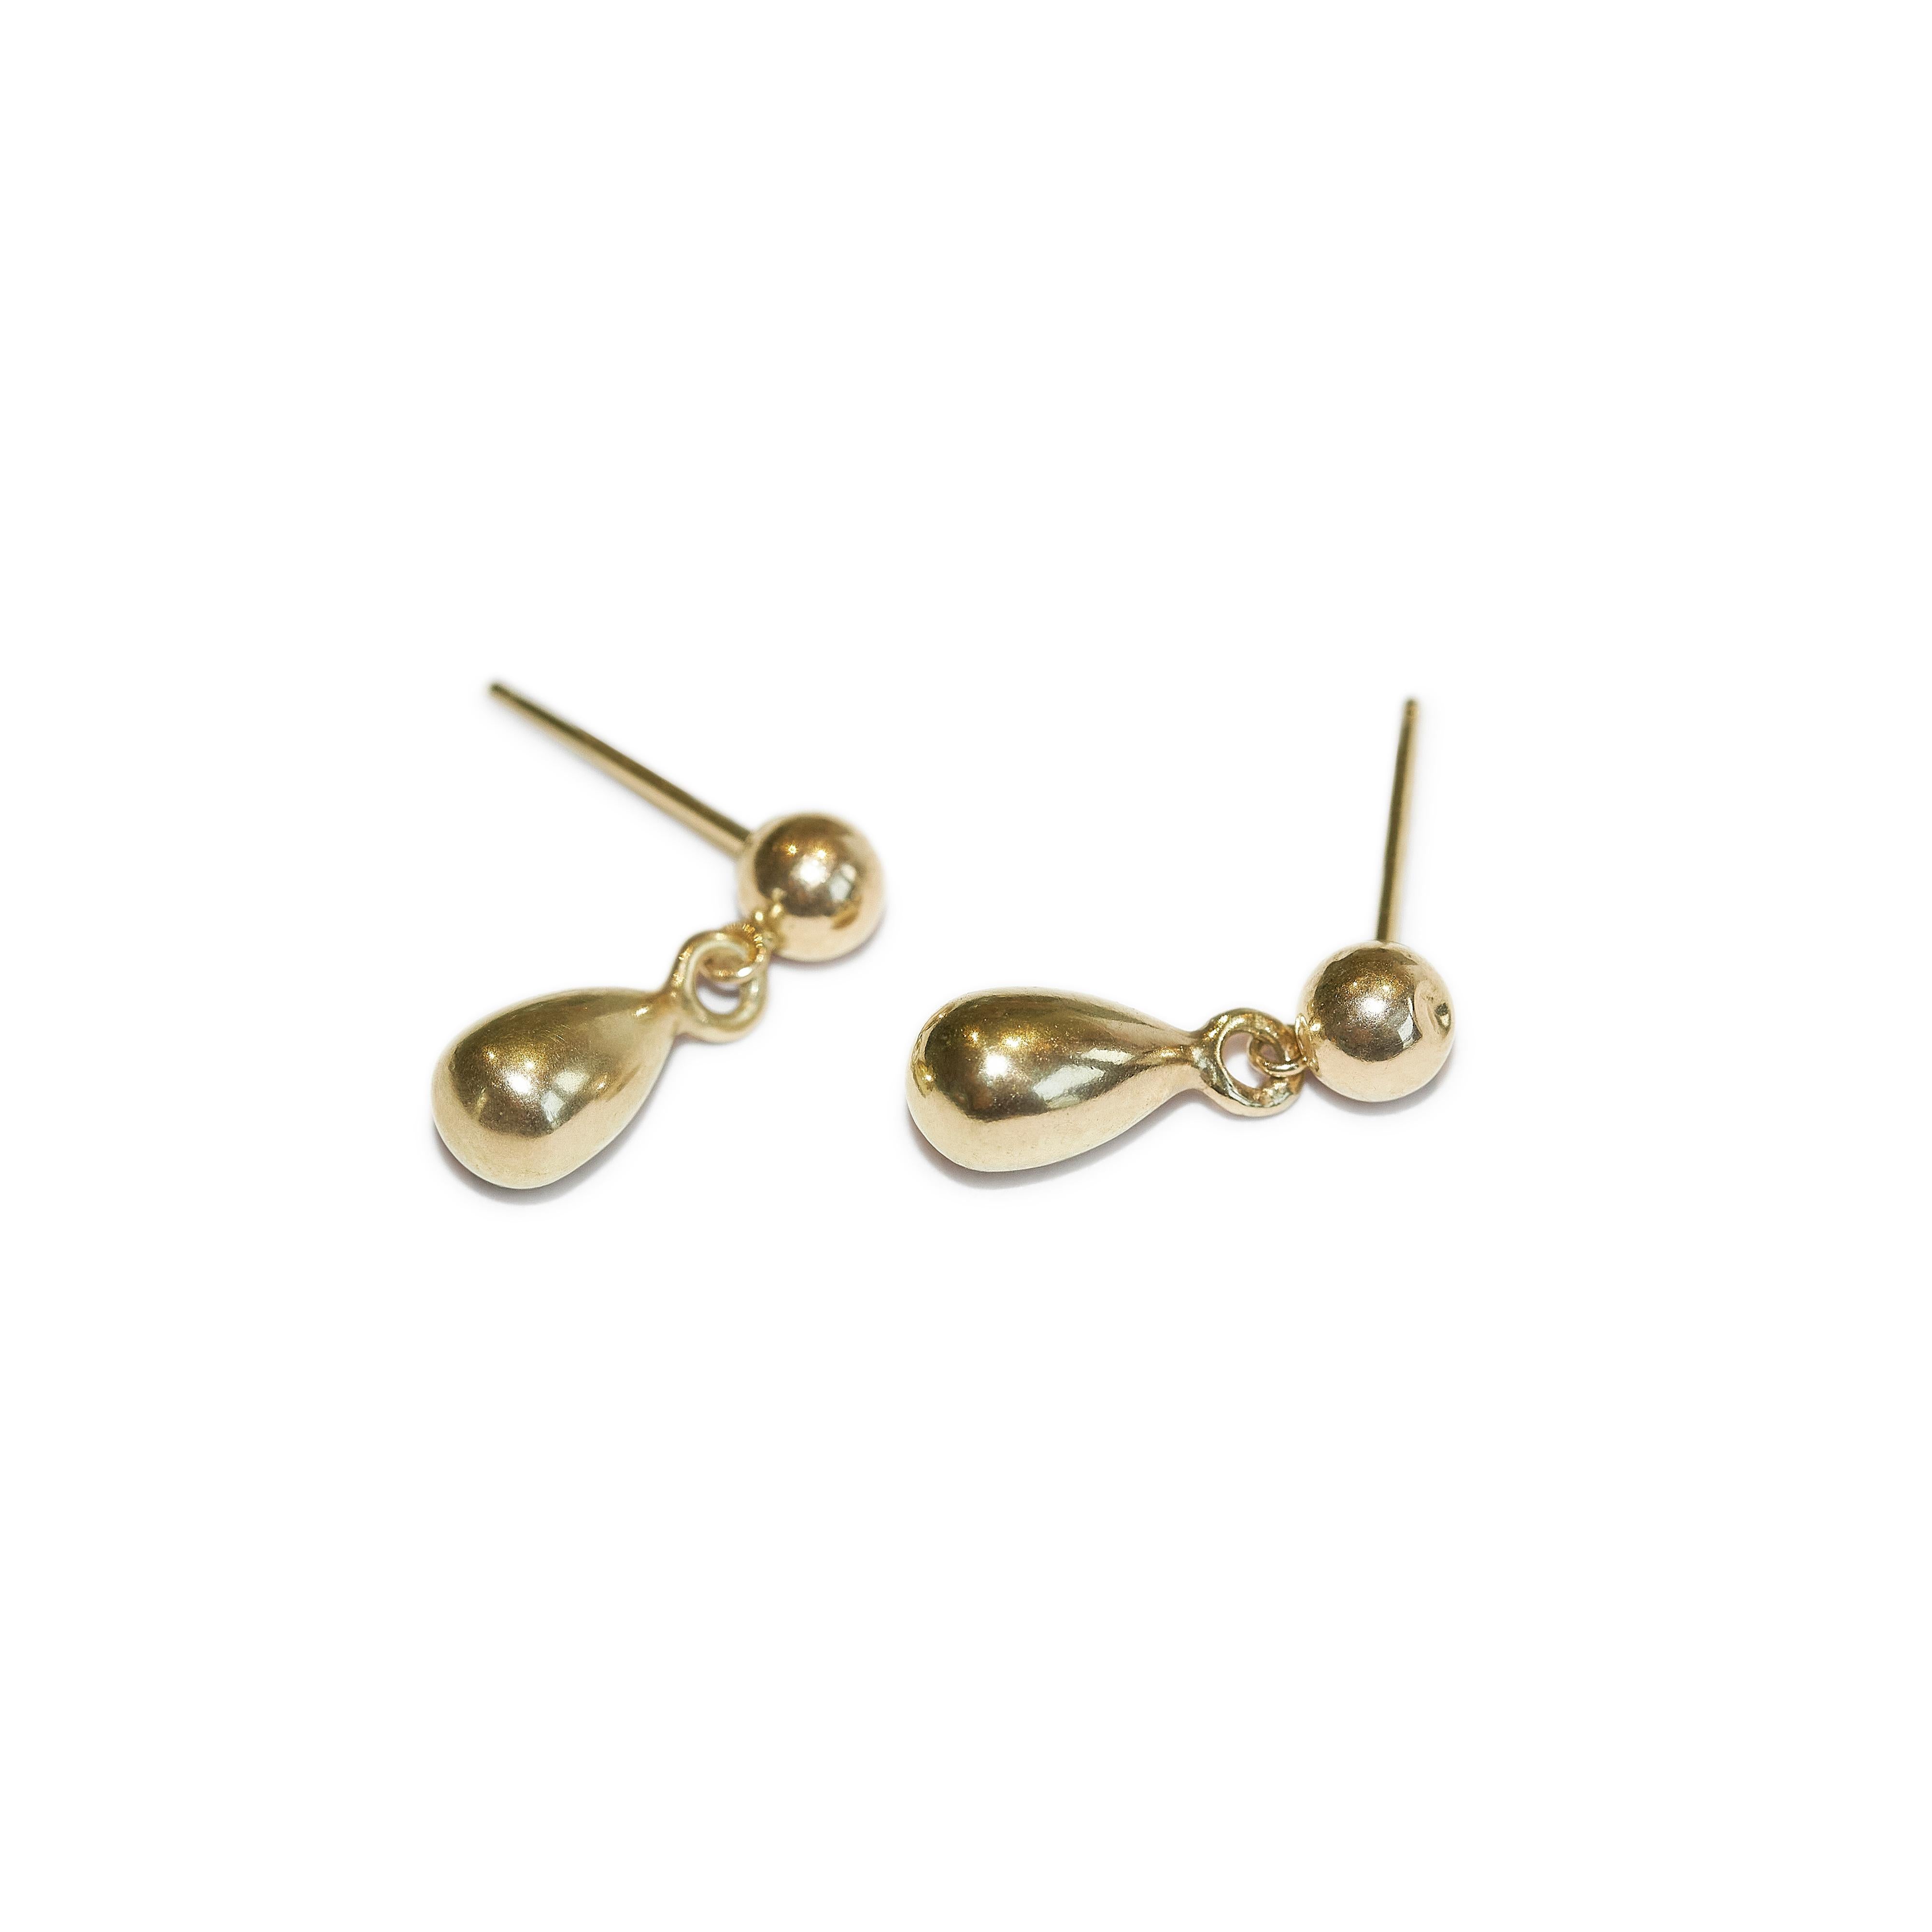 A pair of small stud earrings featuring a solid 9kt gold teardrop charm. 

Handmade to order from Skomer Studio's workshop in North London in recycled 9kt gold.

Details:
Colour: Gold
Composition: 9kt gold
Country of origin: United Kingdom
9kt gold